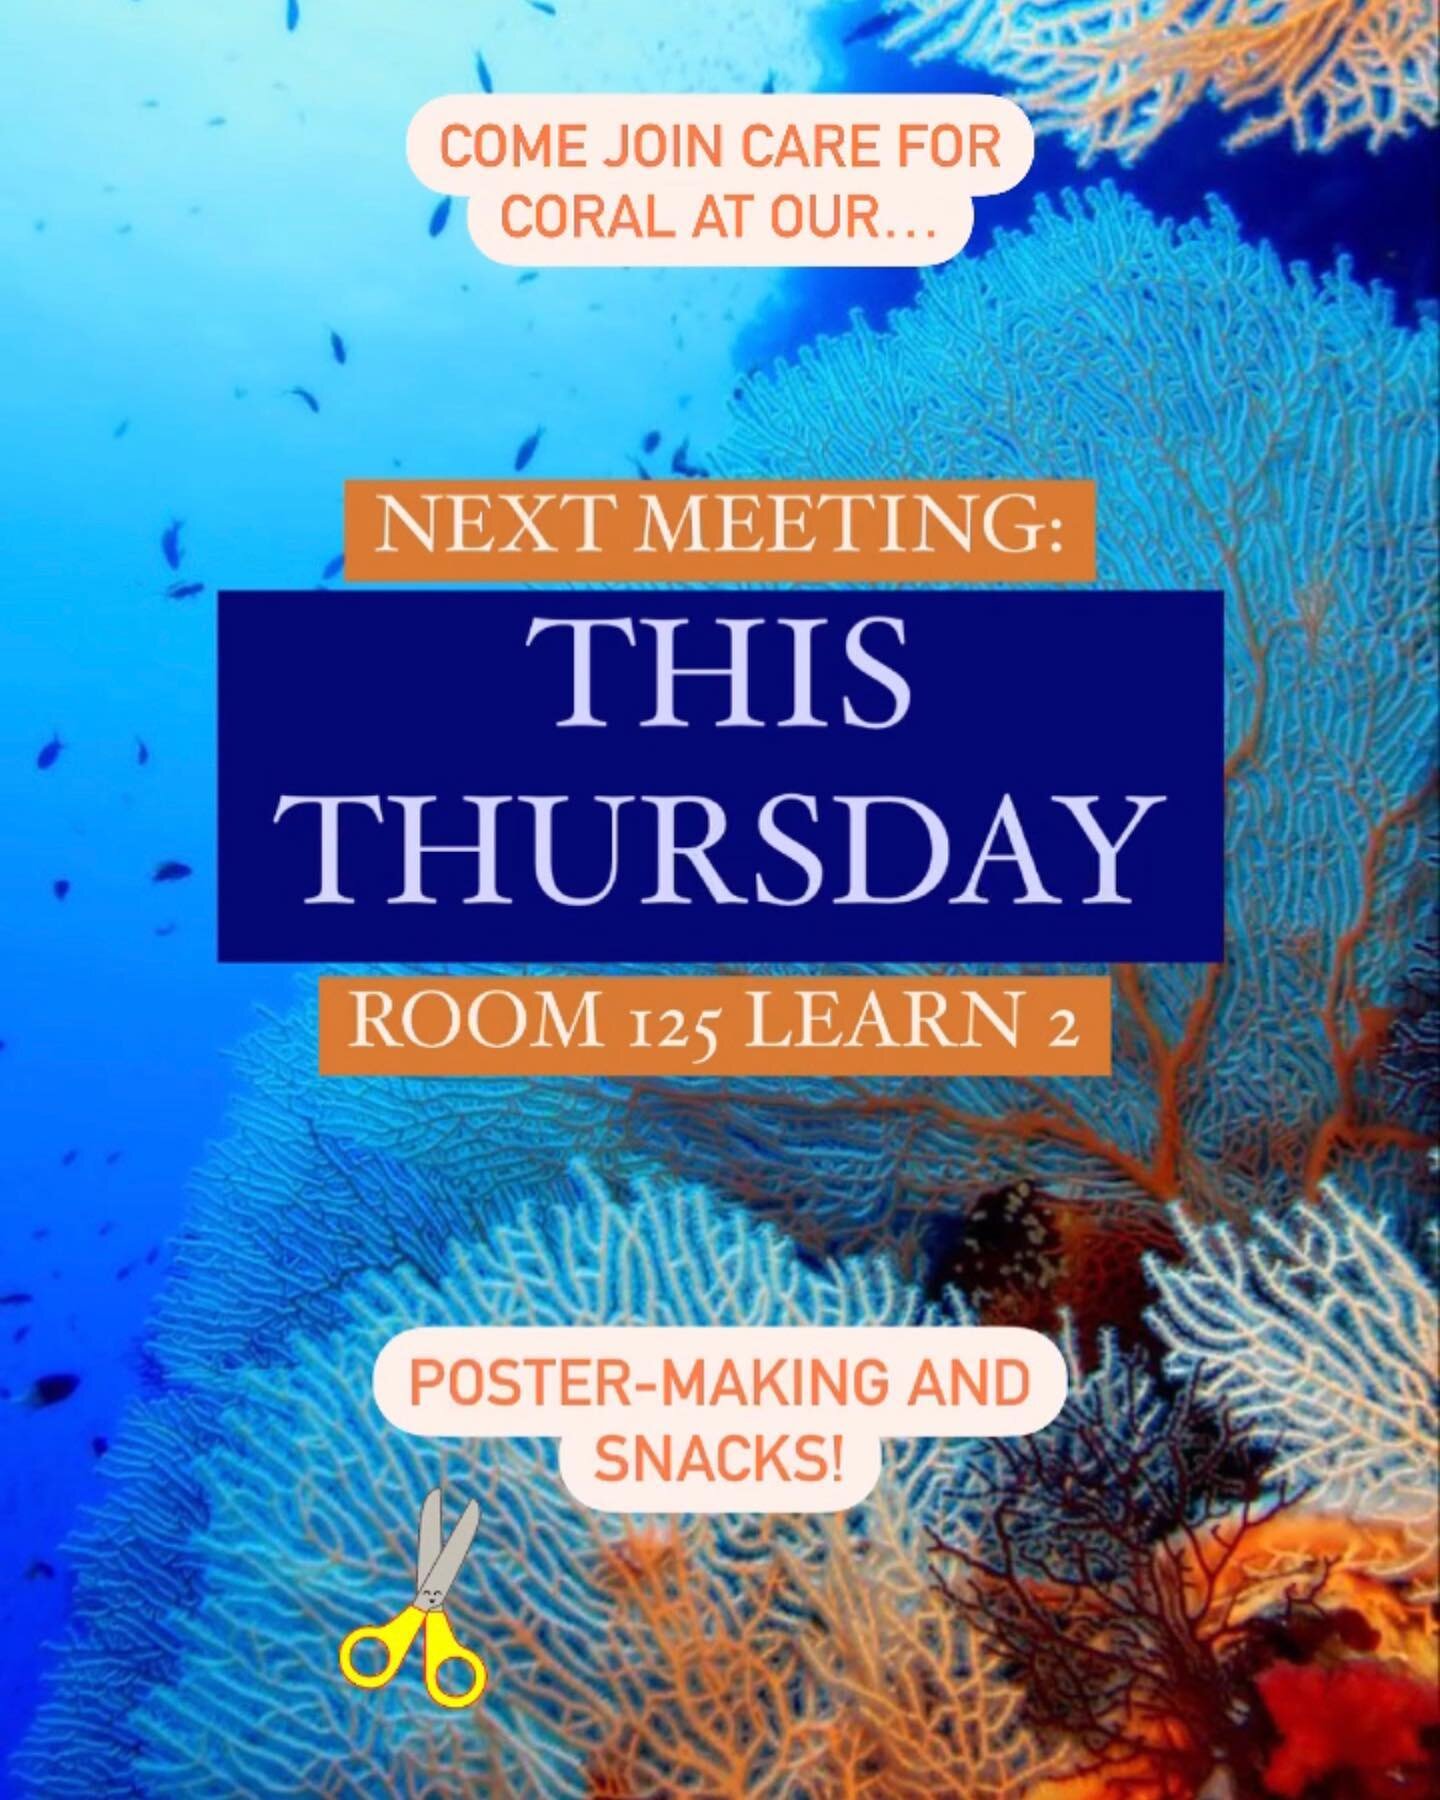 Next meeting this Thursday!! Come make posters to promote the use of reef safe sunscreen, beach clean ups, reusable water bottles, and more for those going on tropical spring break trips. Hope to see everyone there :)